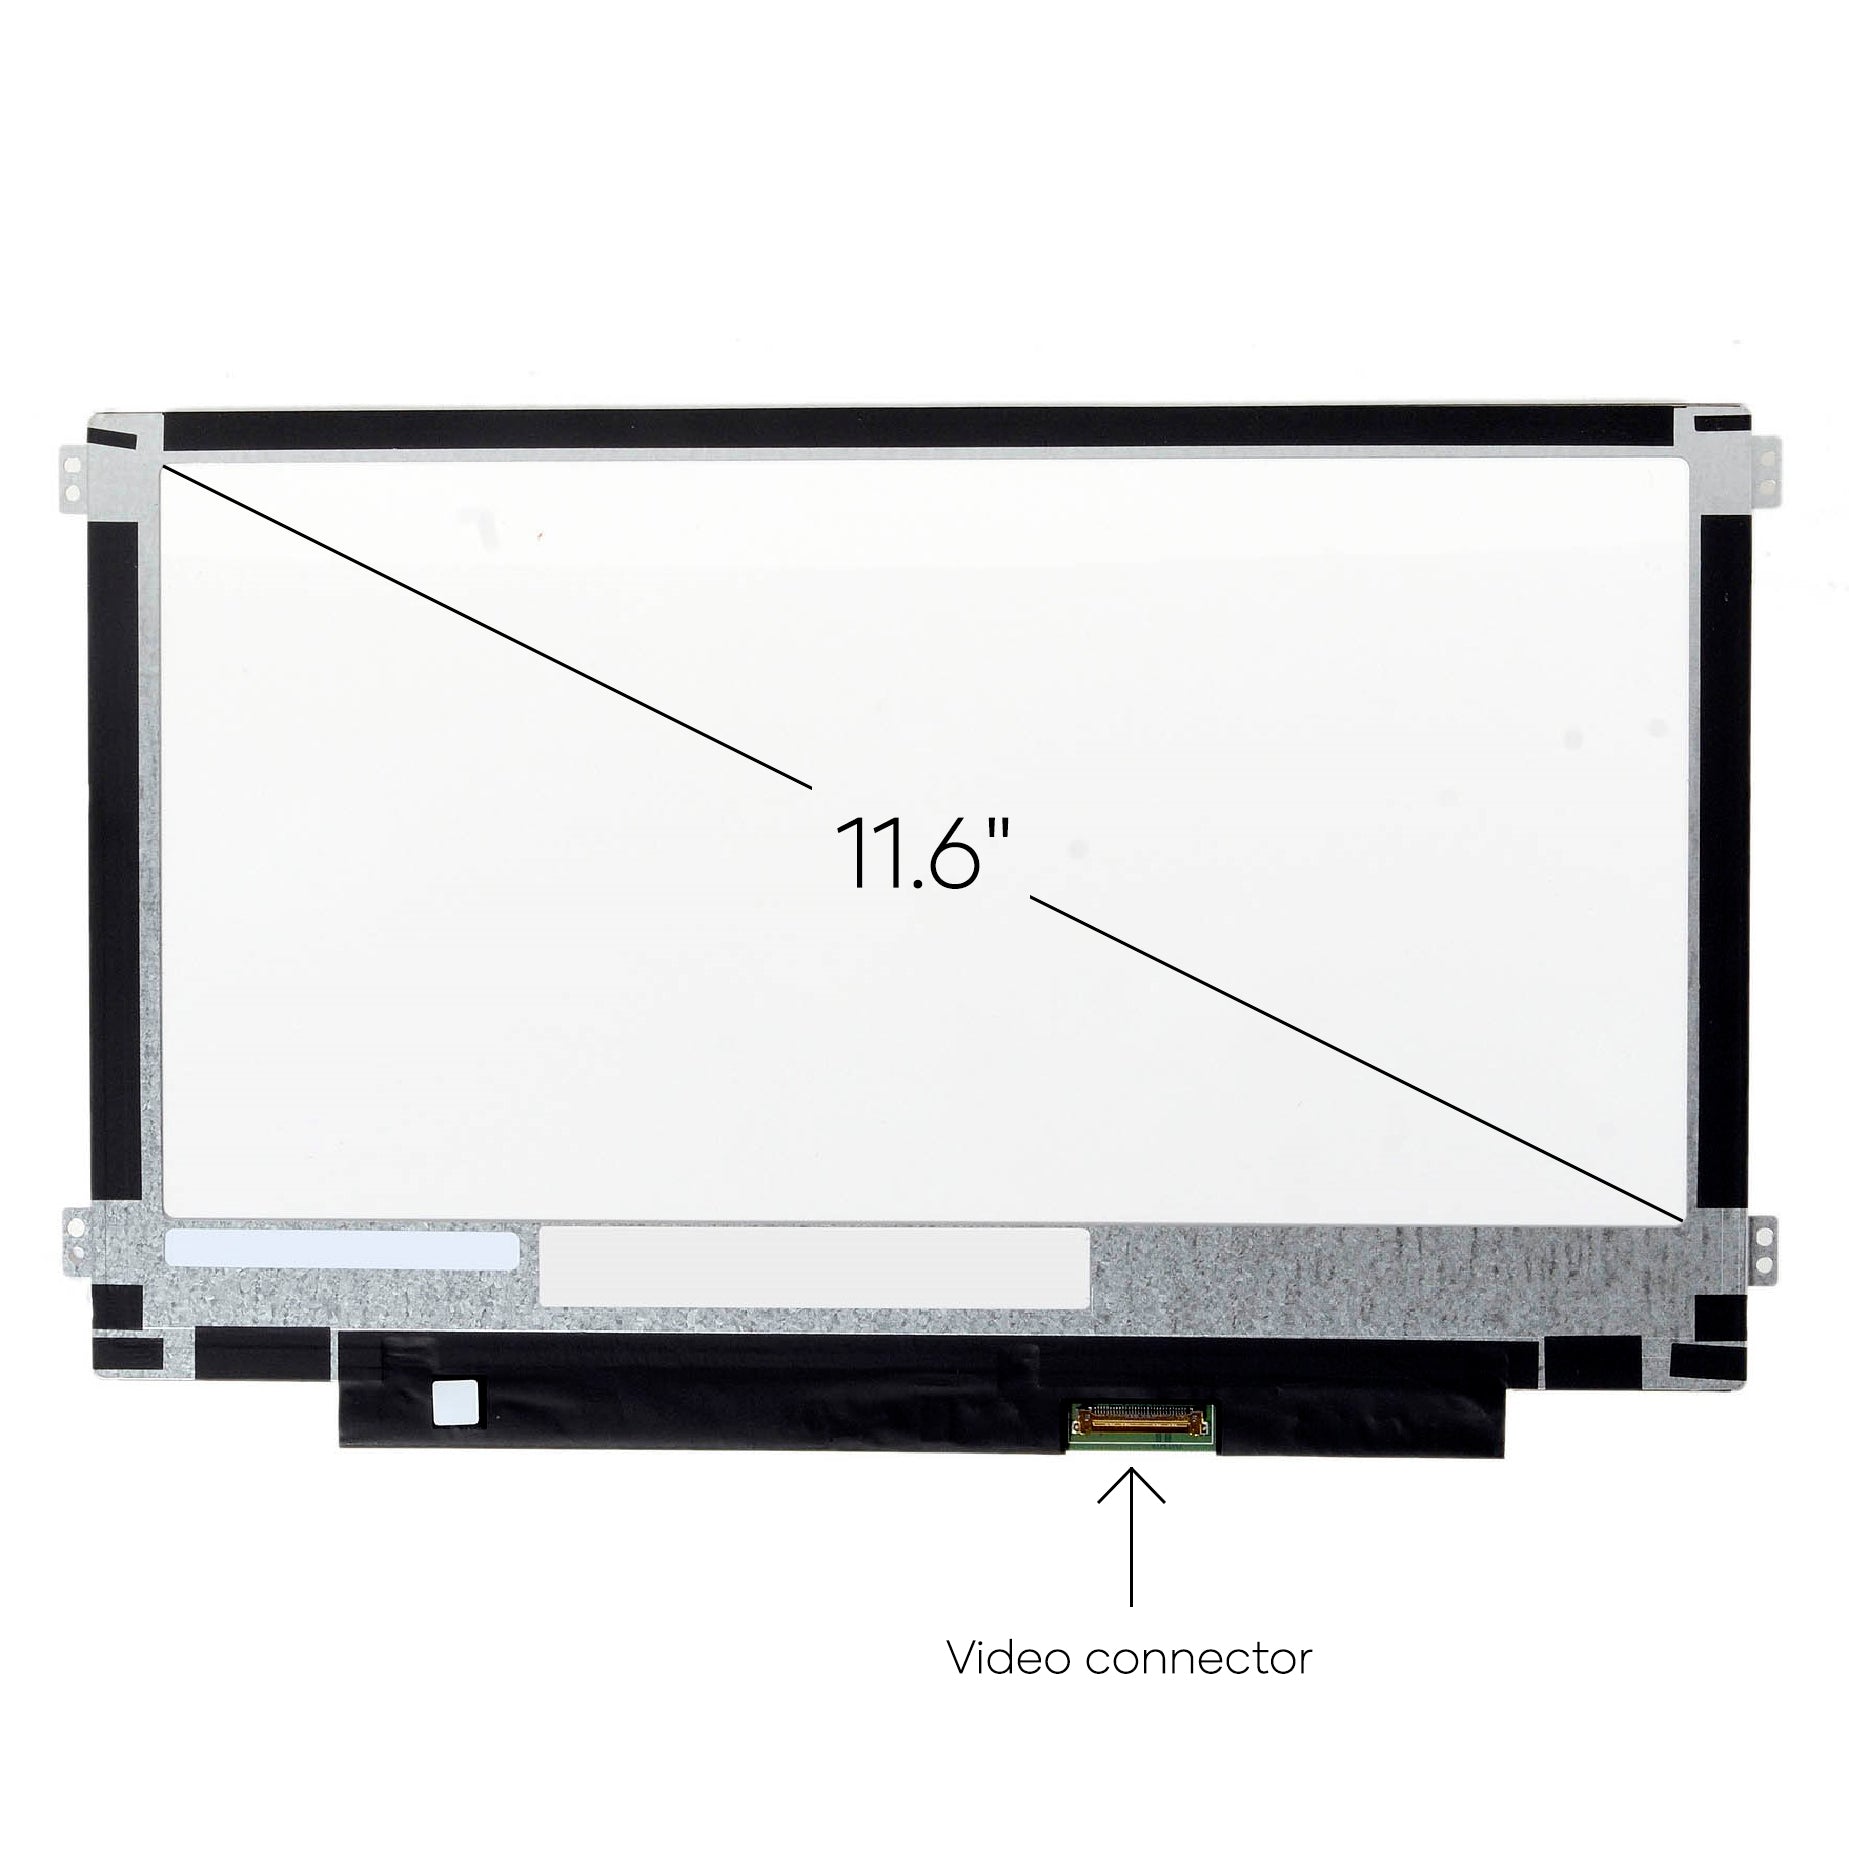 Screen Replacement for 11.6" LCD LED Panel Display for CTL J2, J4, J2X, J4X, NL6